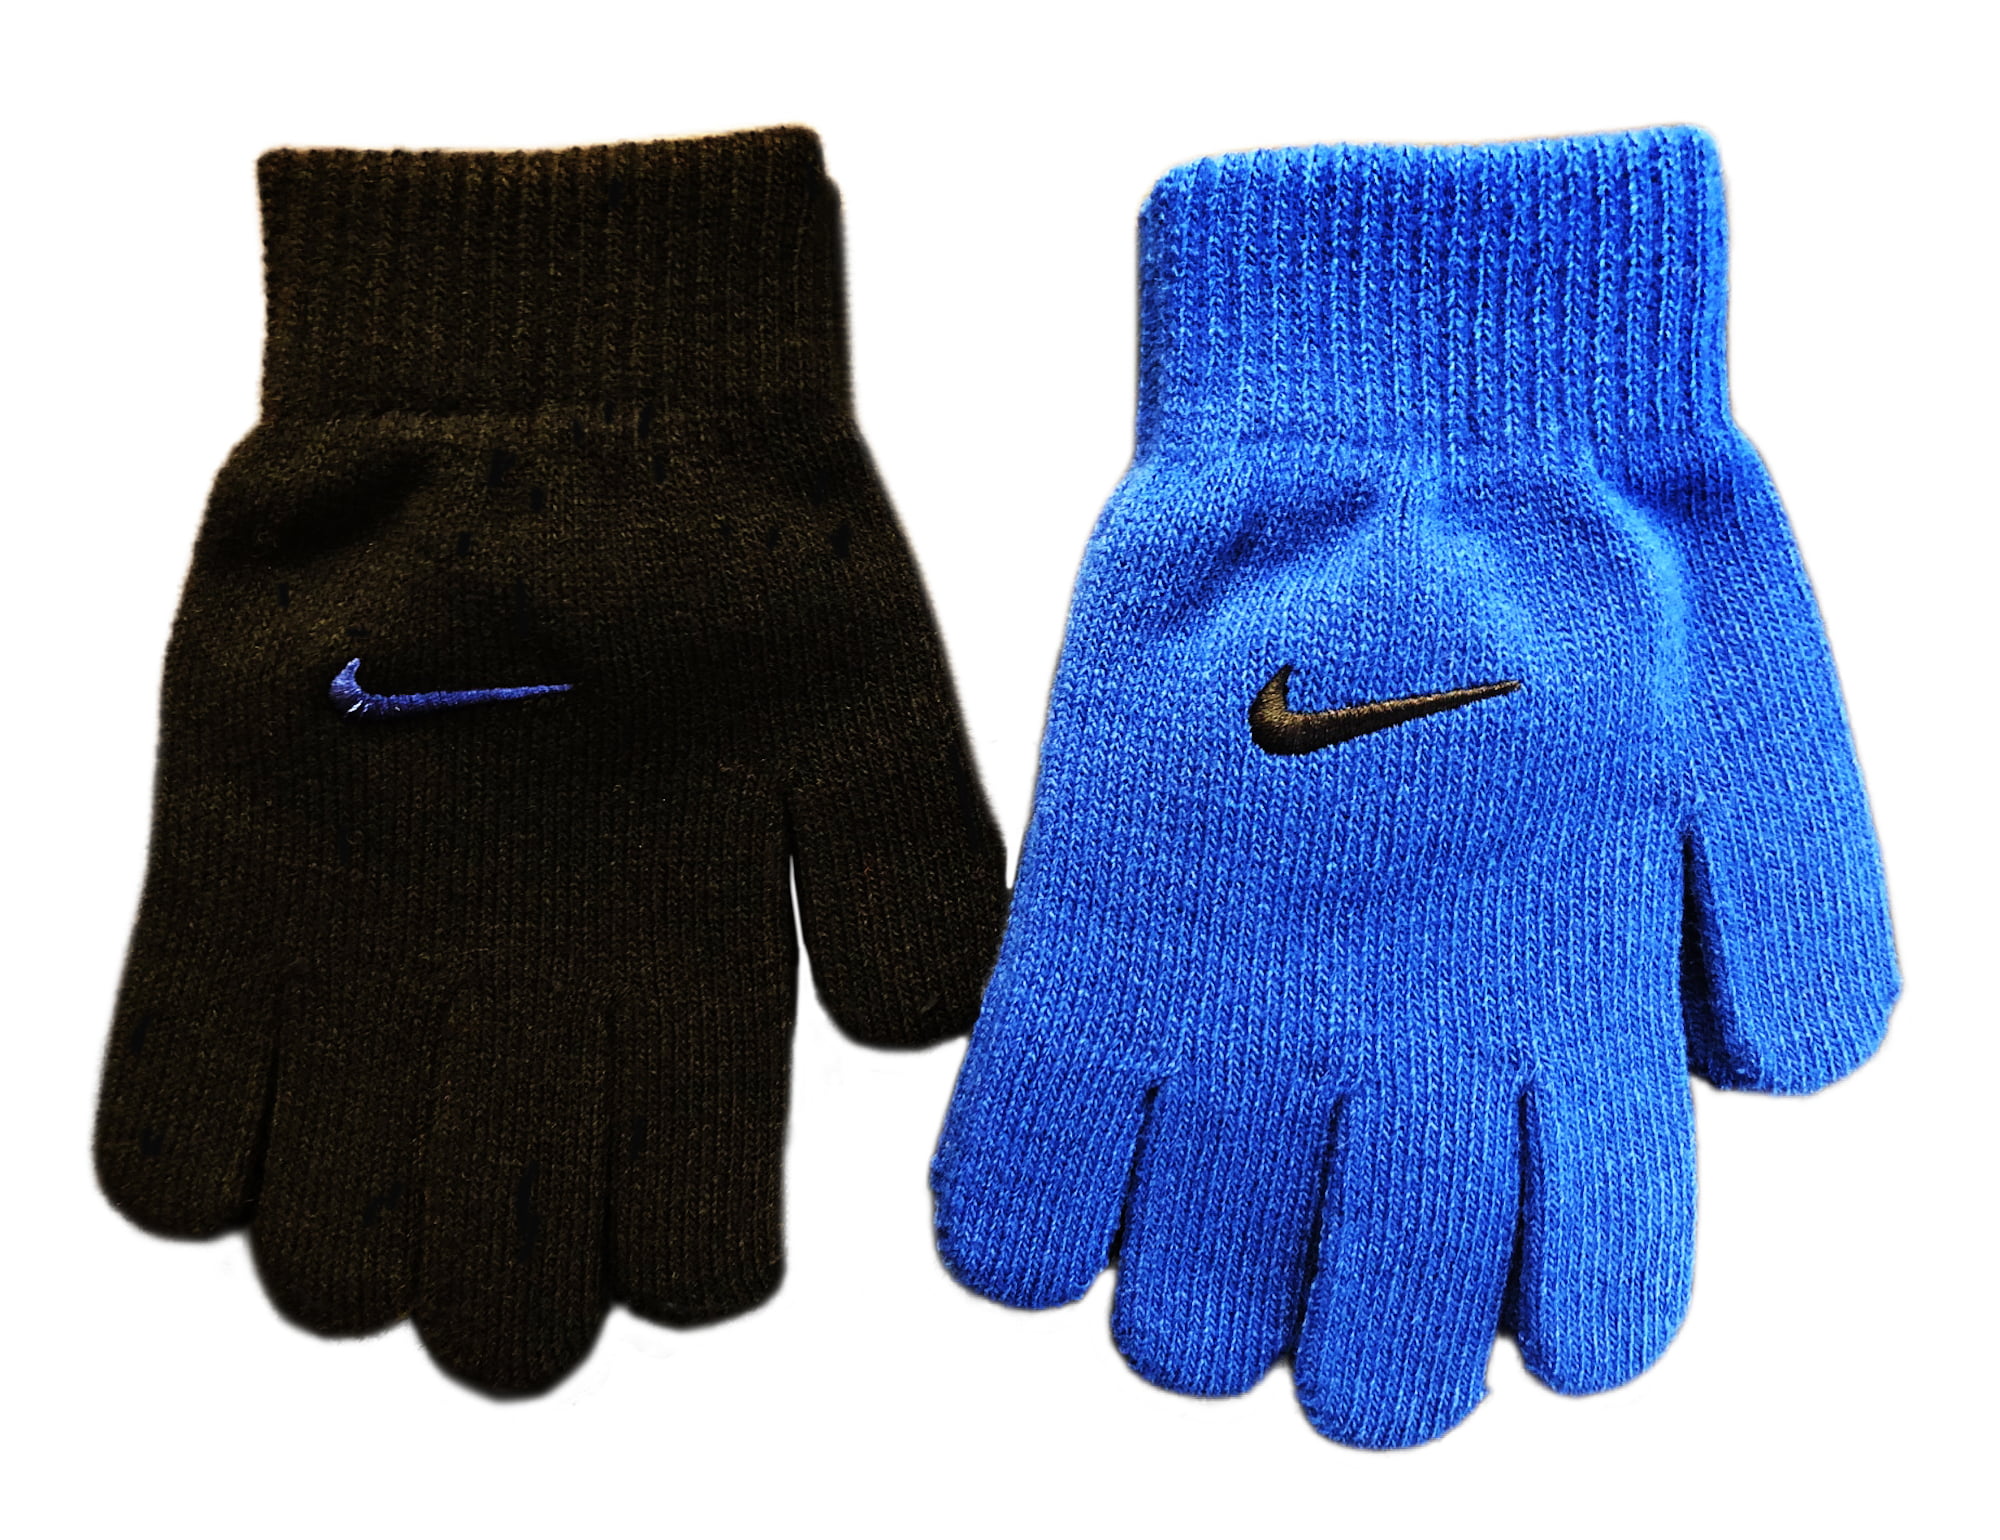 Mens Plain Thermal Knit Warm Winter Gloves 3 Pairs Various Styles